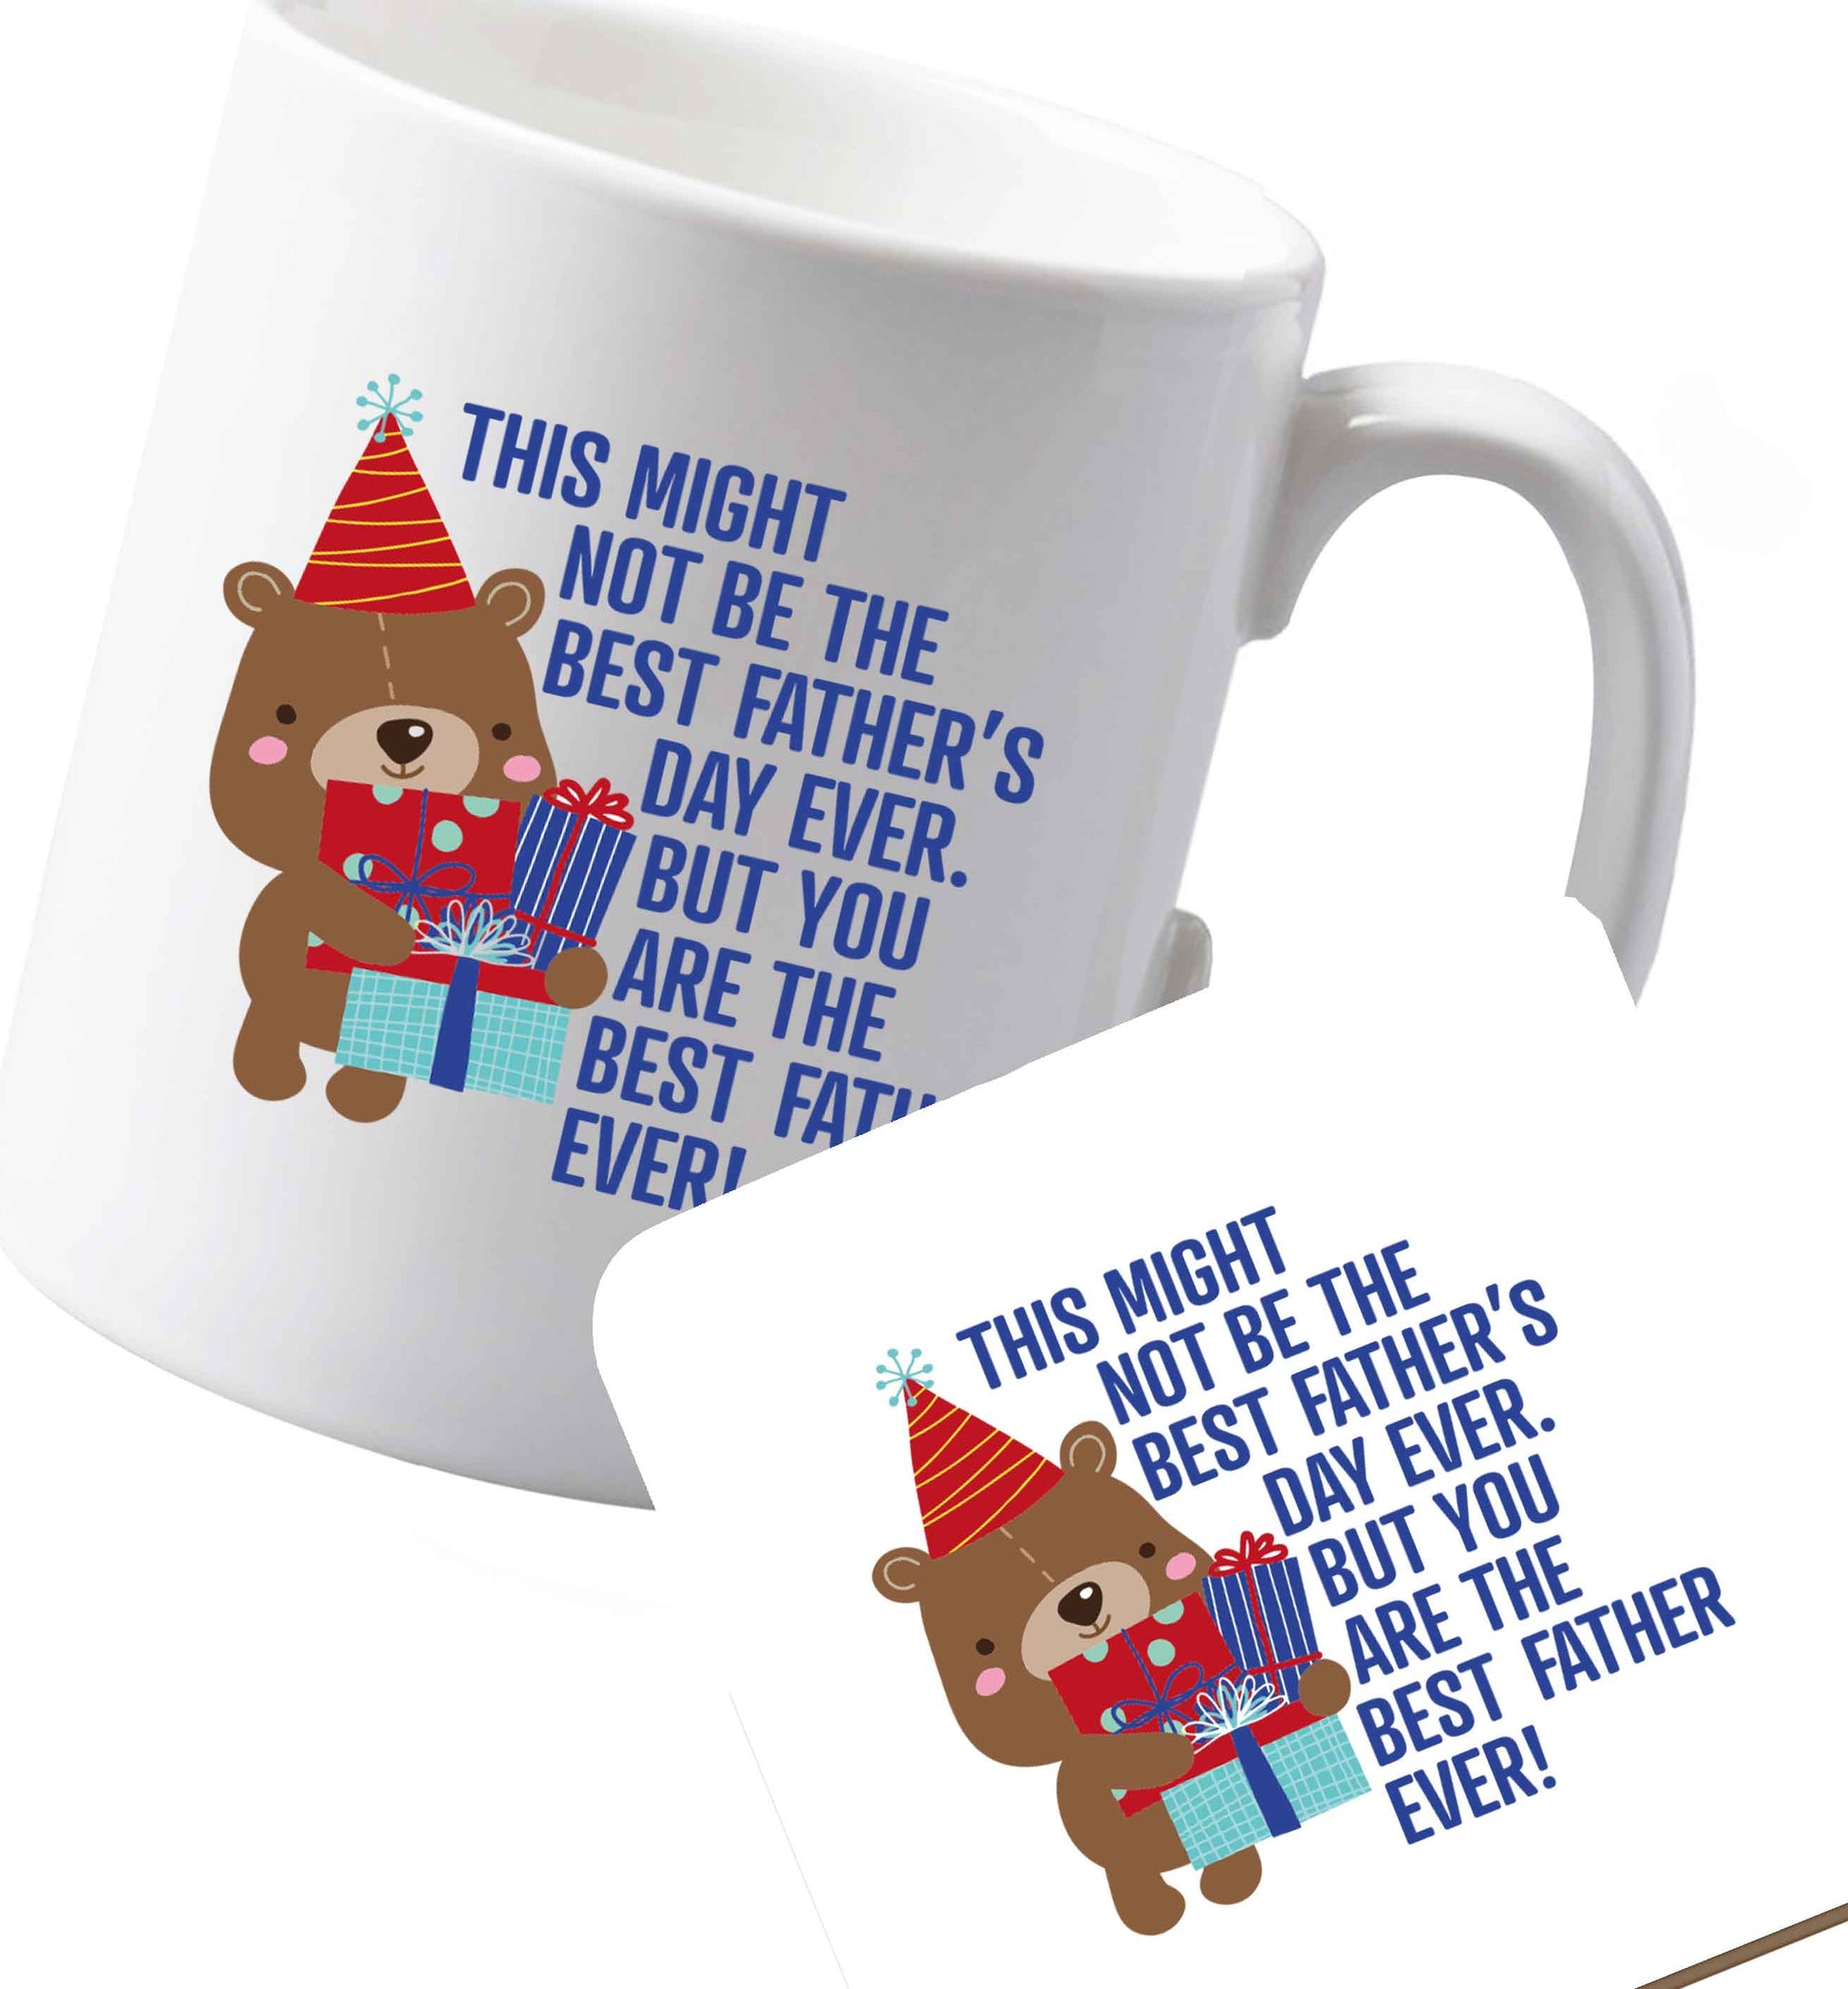 10 oz Ceramic mug and coaster It might not be the best Father's Day ever but you are the best father ever! both sides